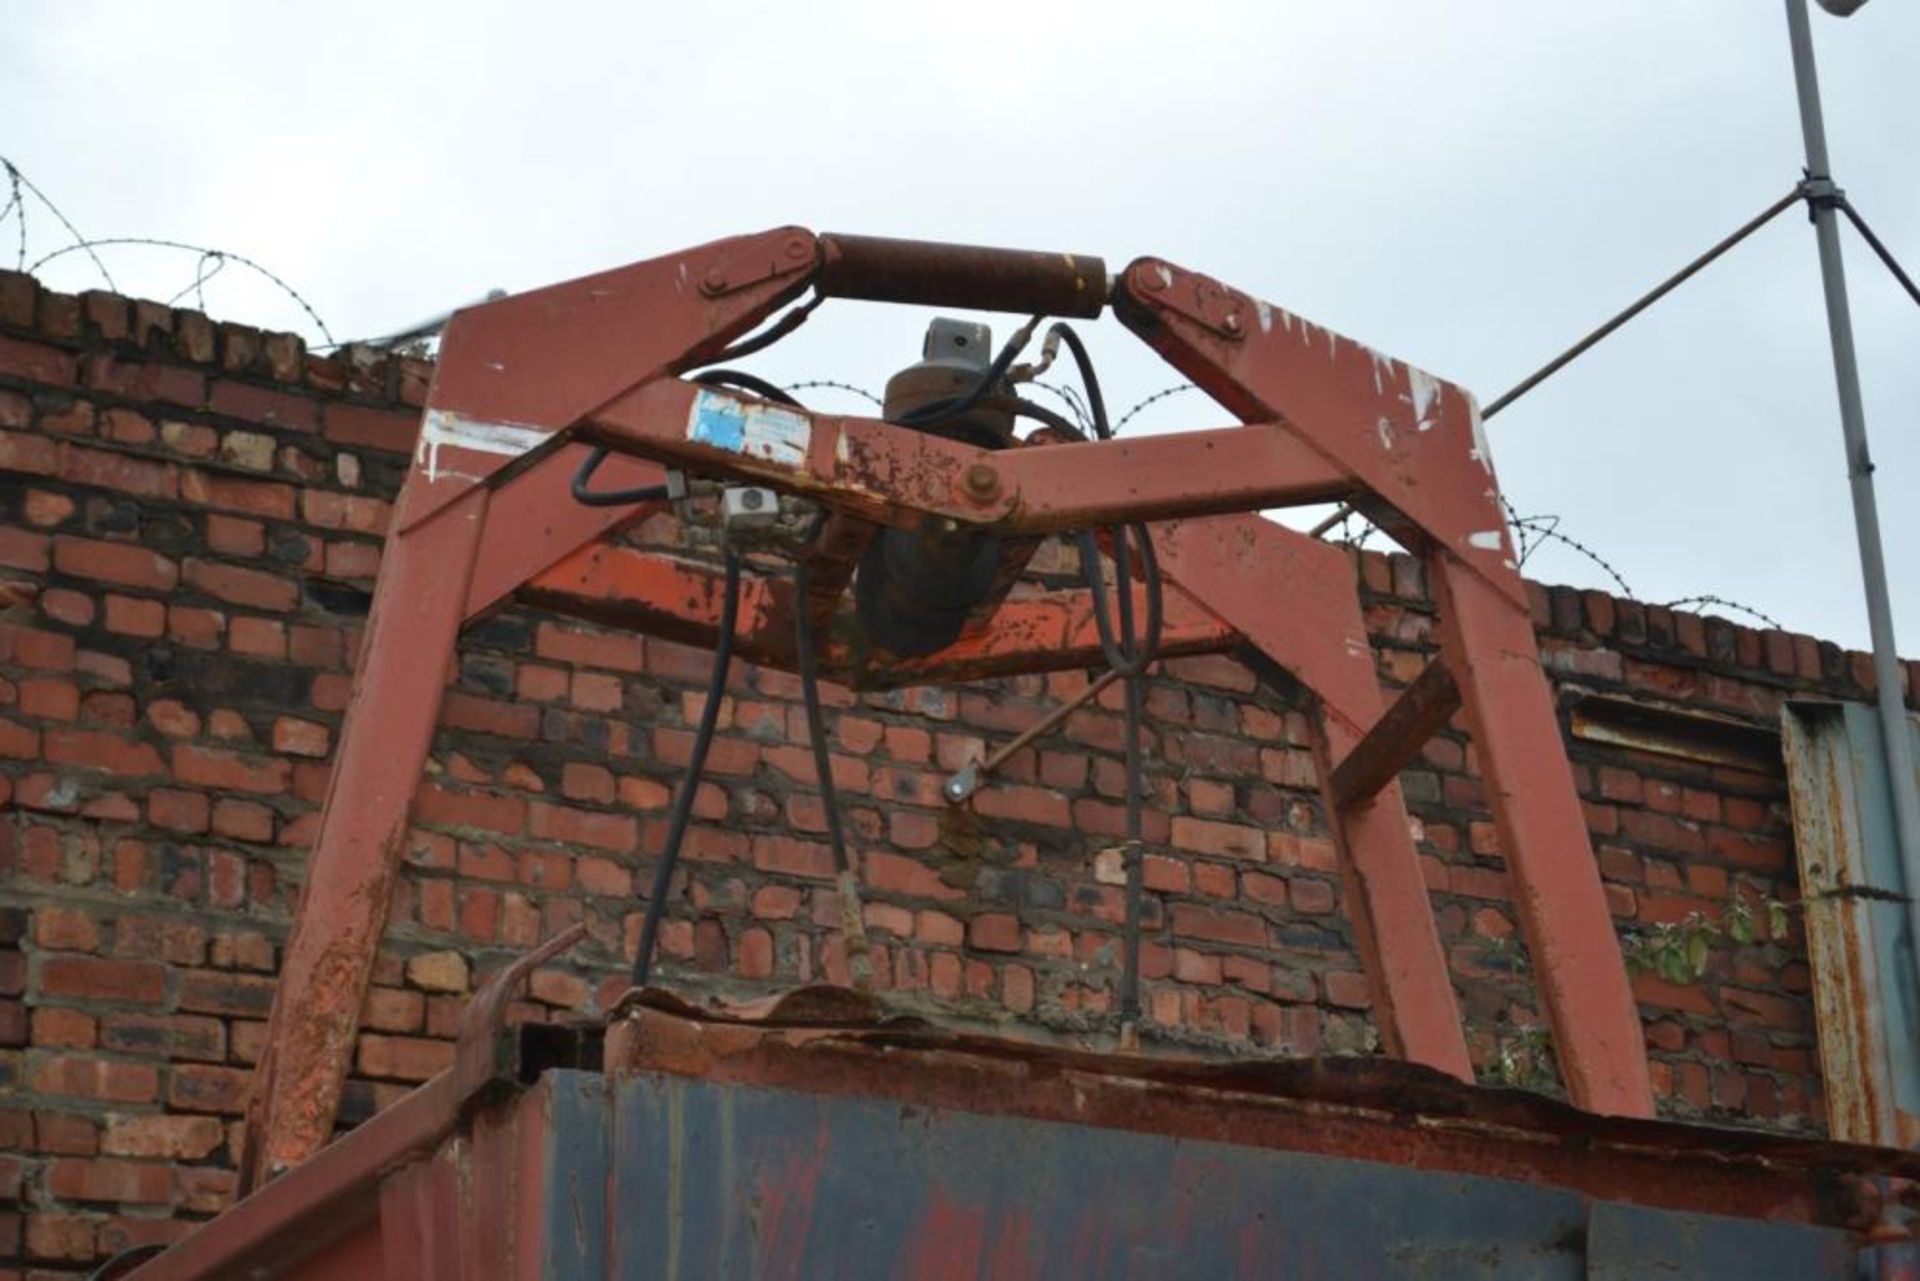 1 x Industrial Palfinger 450GF Grapple Claw - CL464 - Location:Liverpool L19 - Used - Image 14 of 19